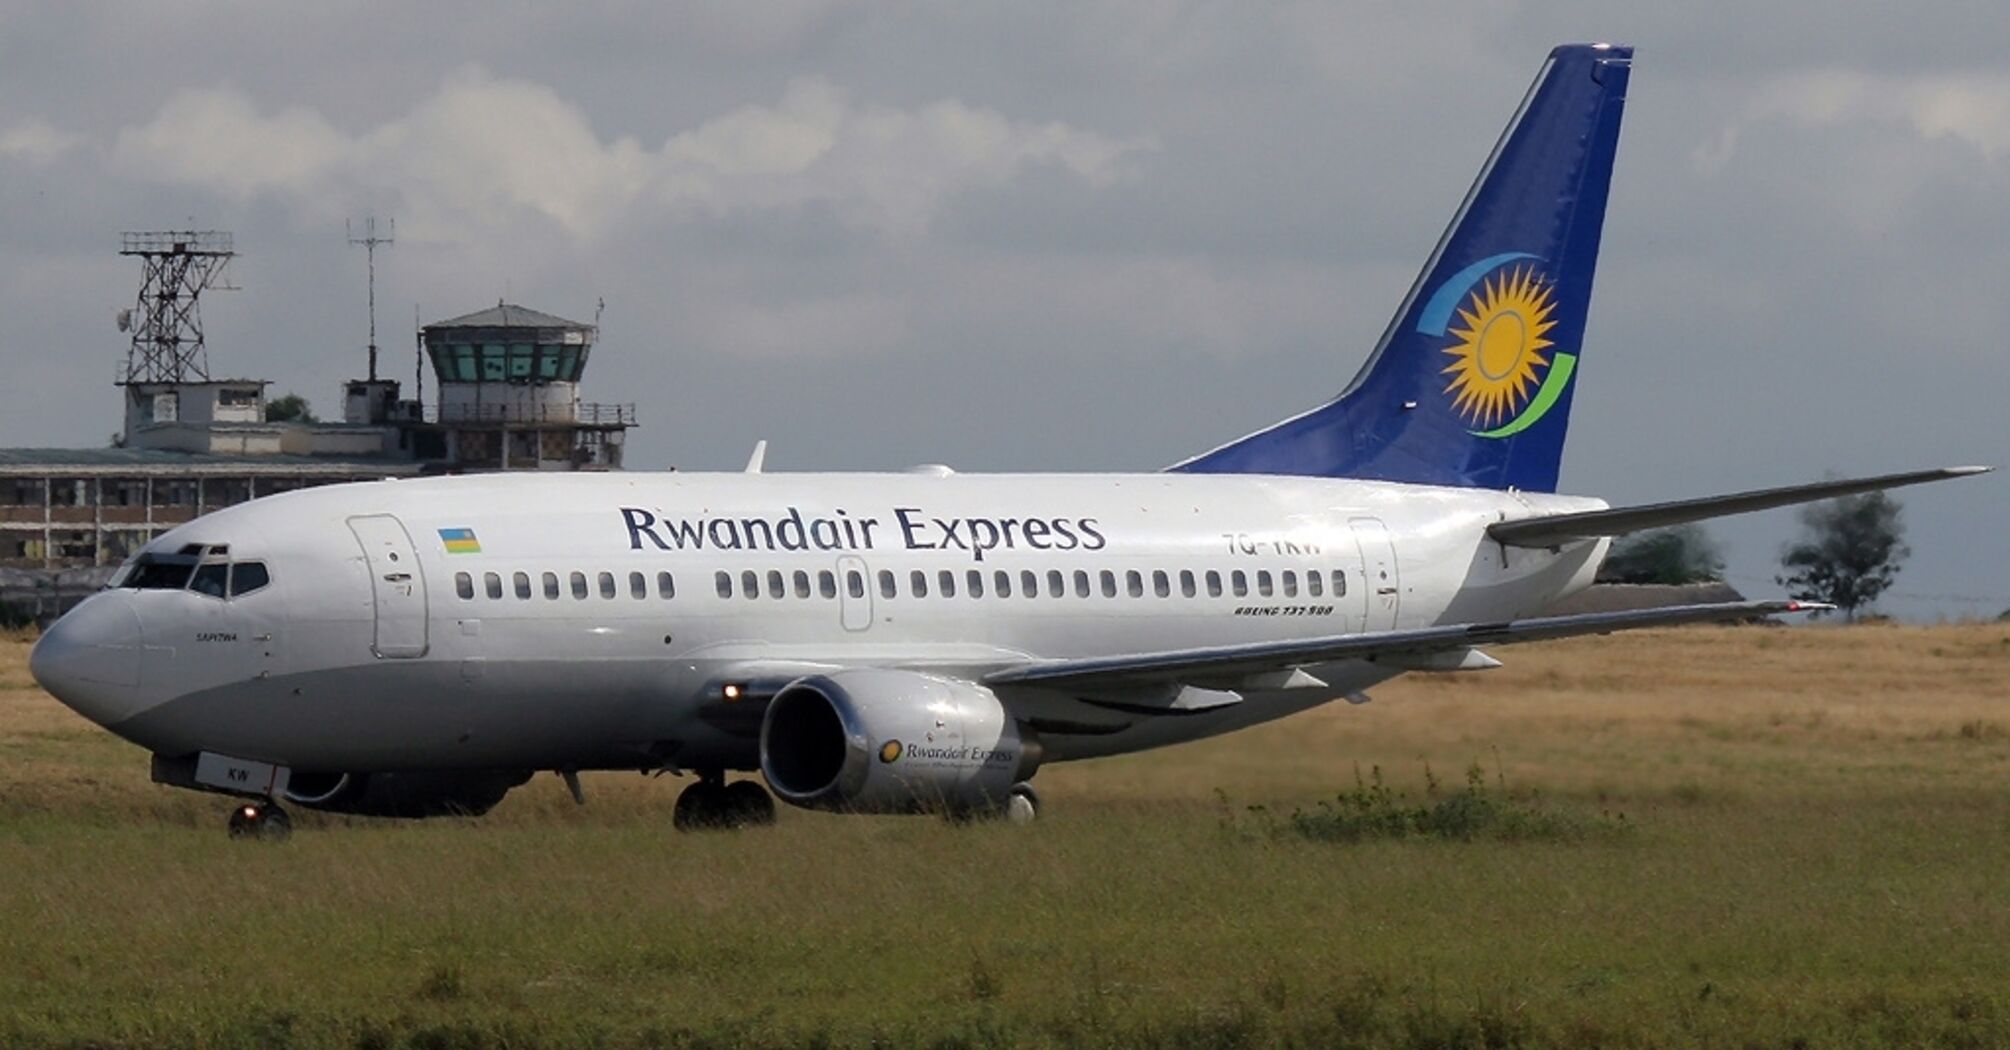 Rwandair Express Compensation for Delayed or Cancelled Flights